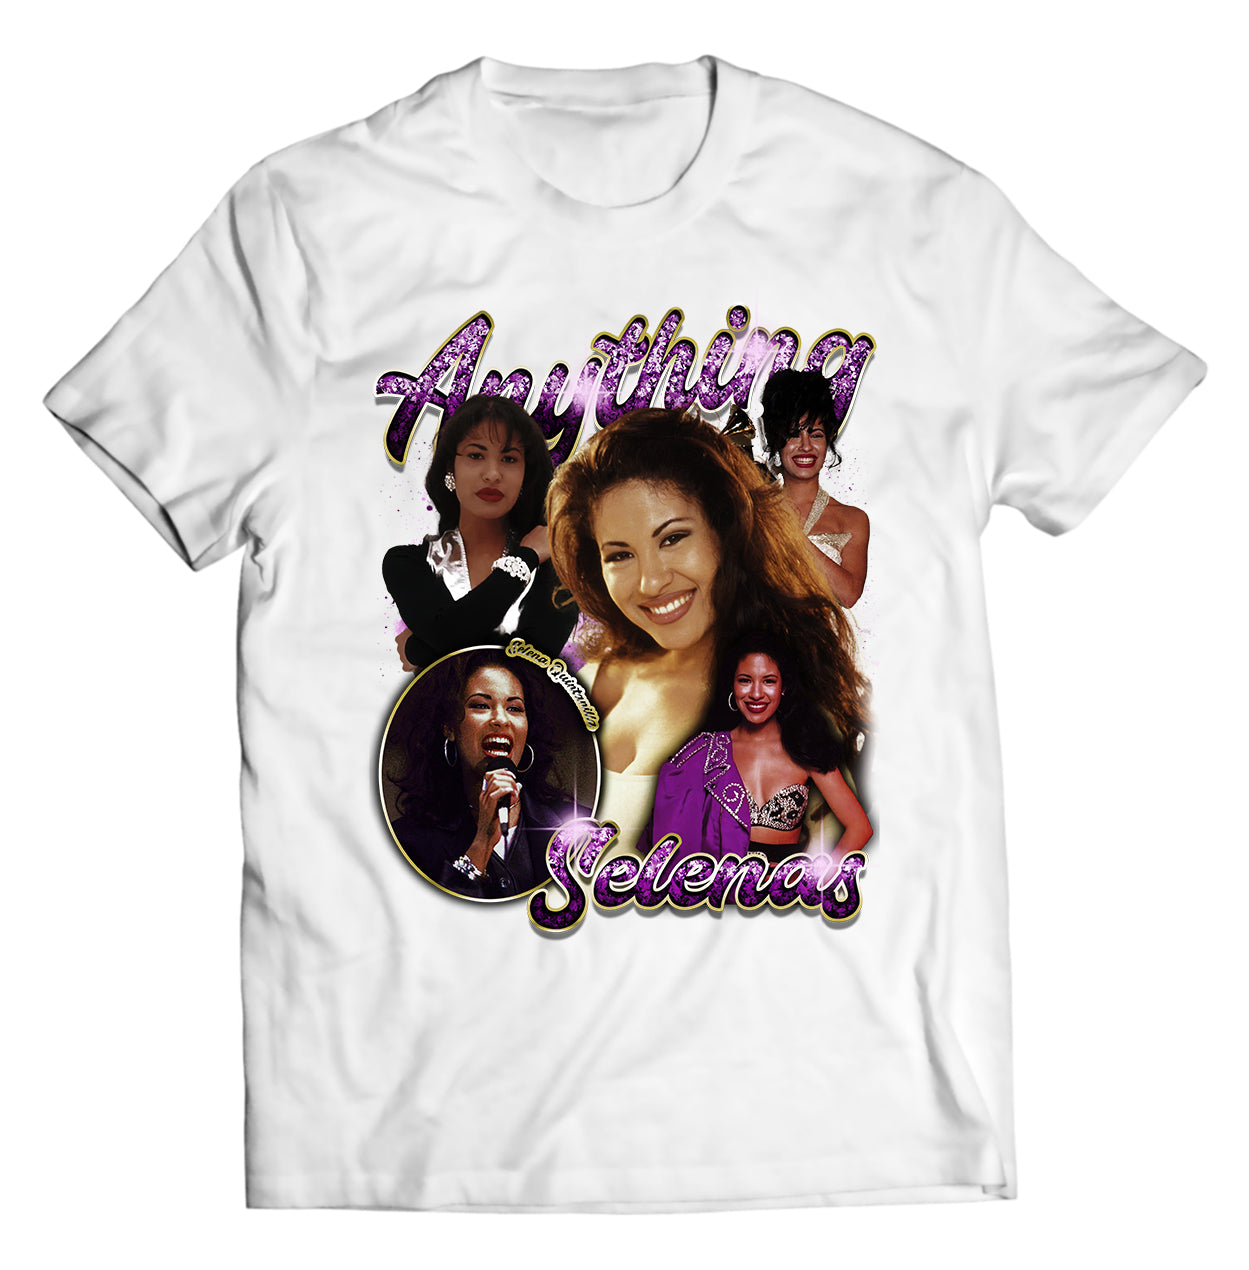 Anything for Selenas Shirt - Direct To Garment Quality Print - Unisex Shirt - Gift For Him or Her